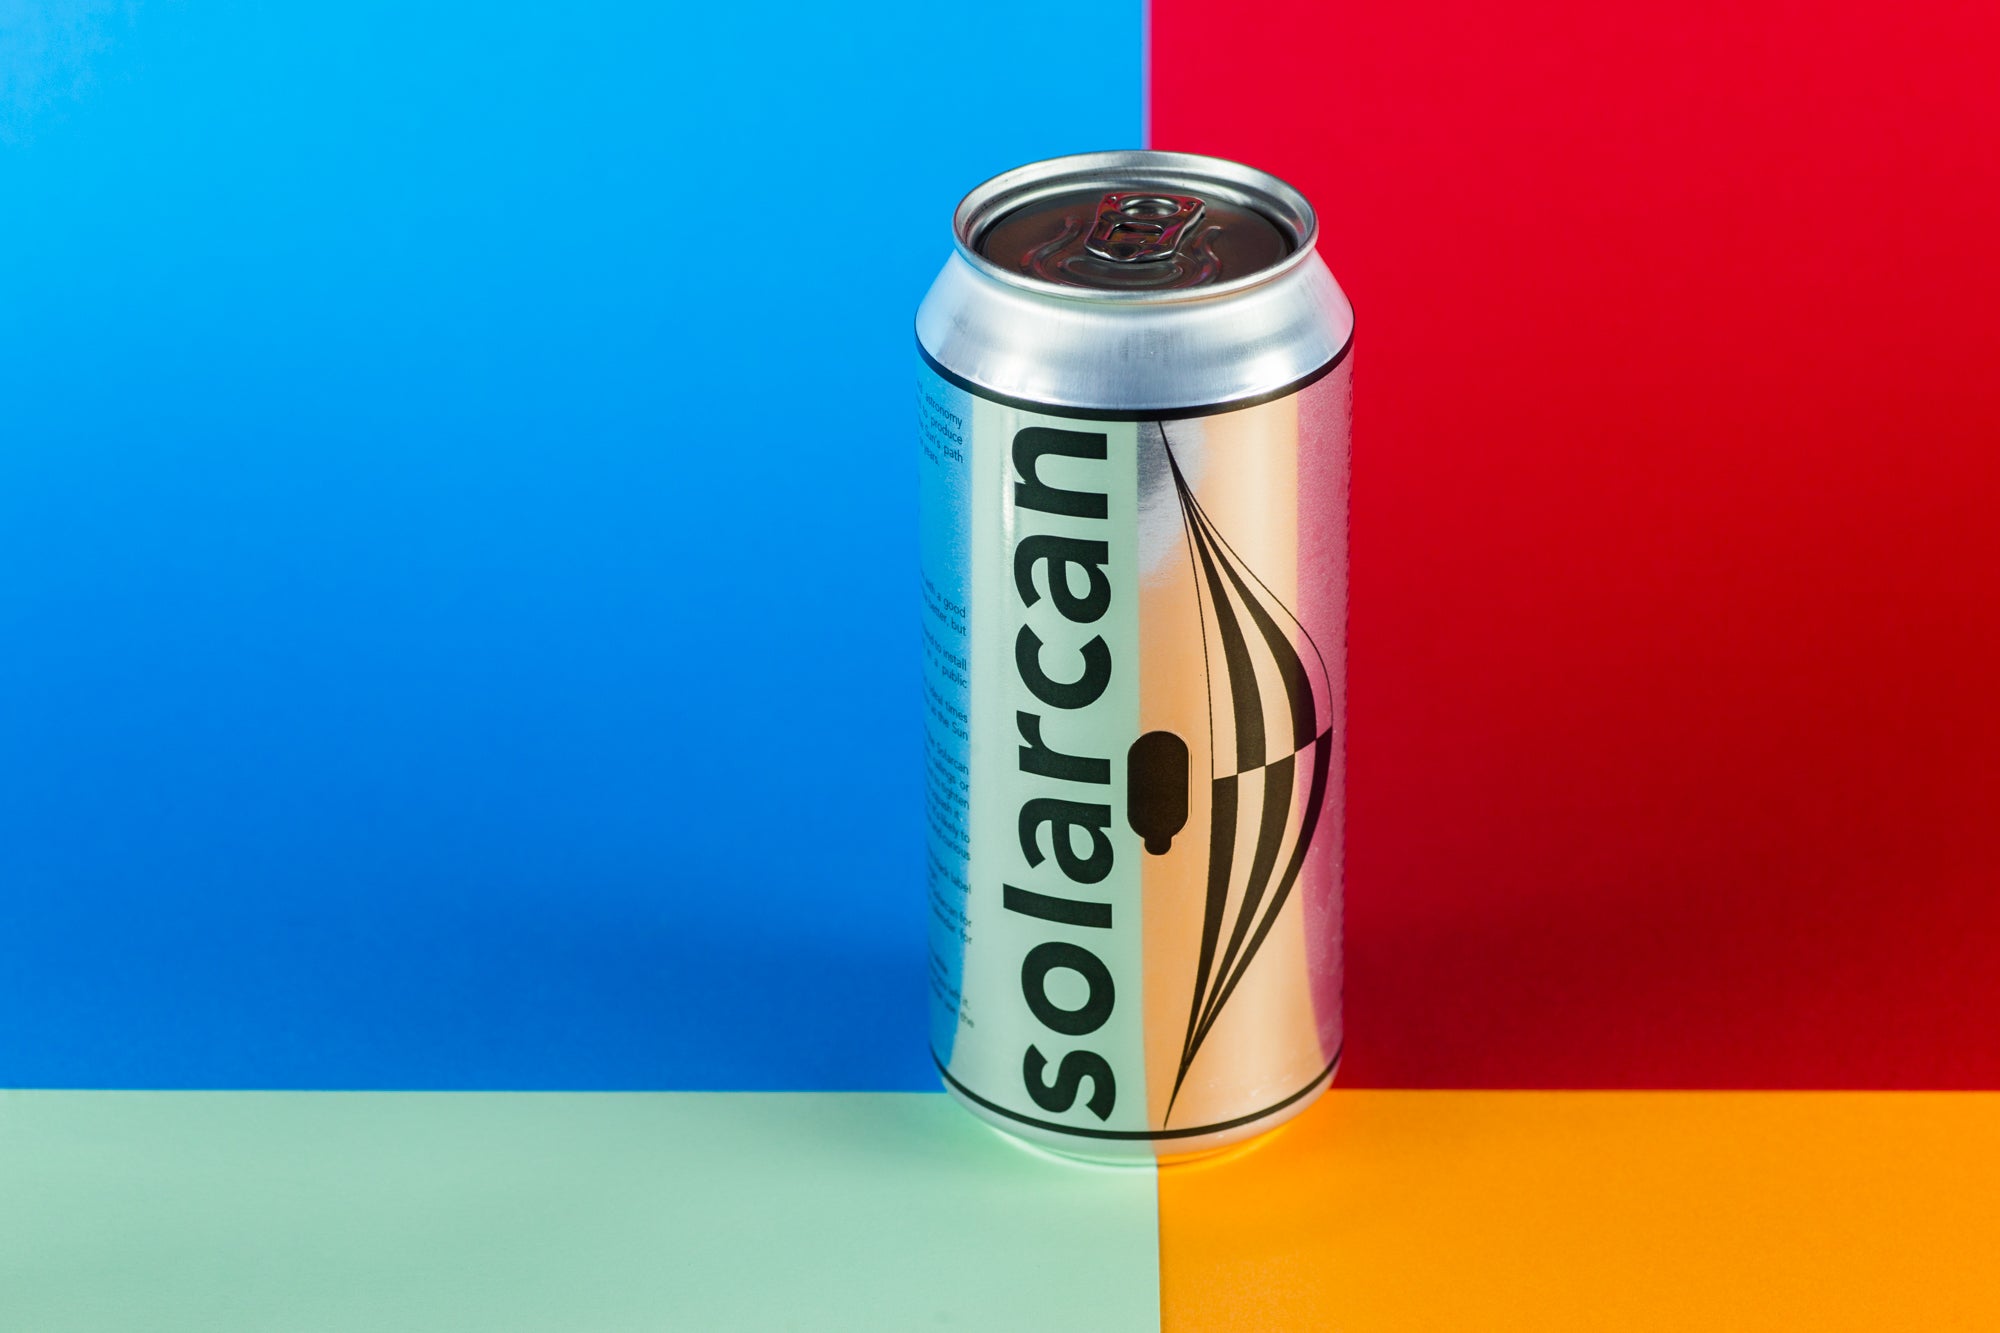 The original Solarcan was housed in a full-sized beverage container.